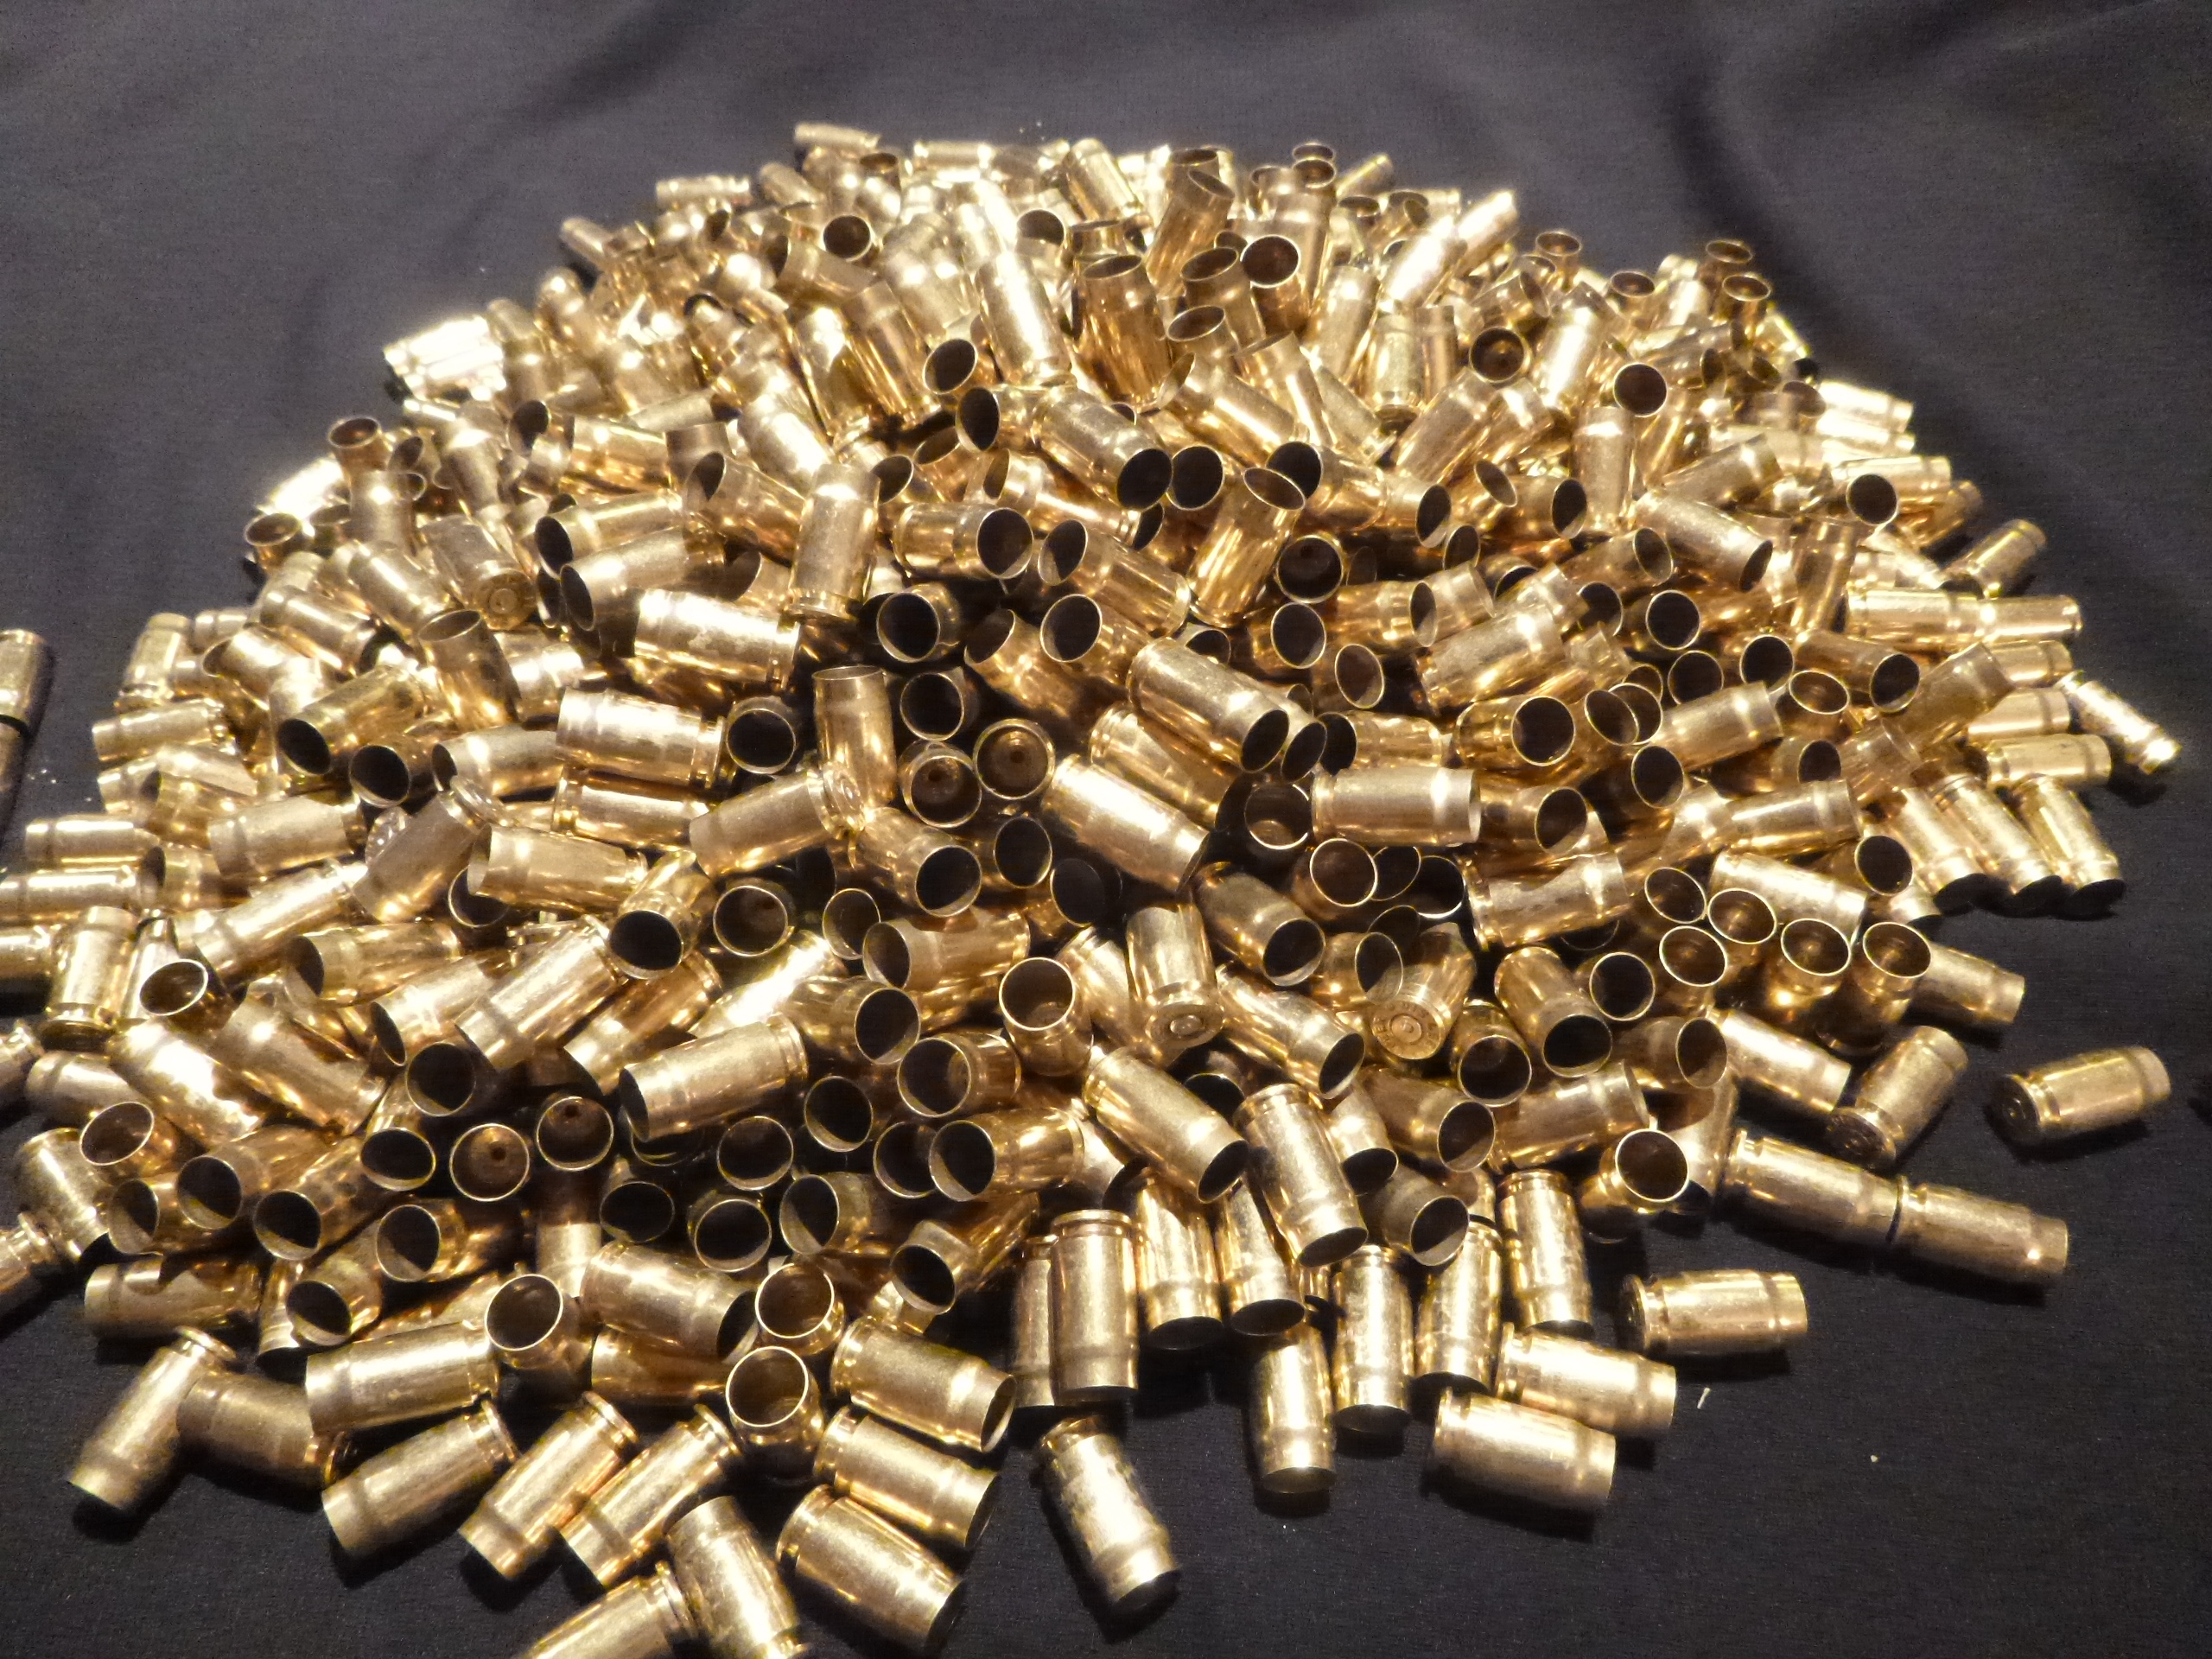 357 SIG Once Fired Brass – New and Used Guns, Gear, Ammunition